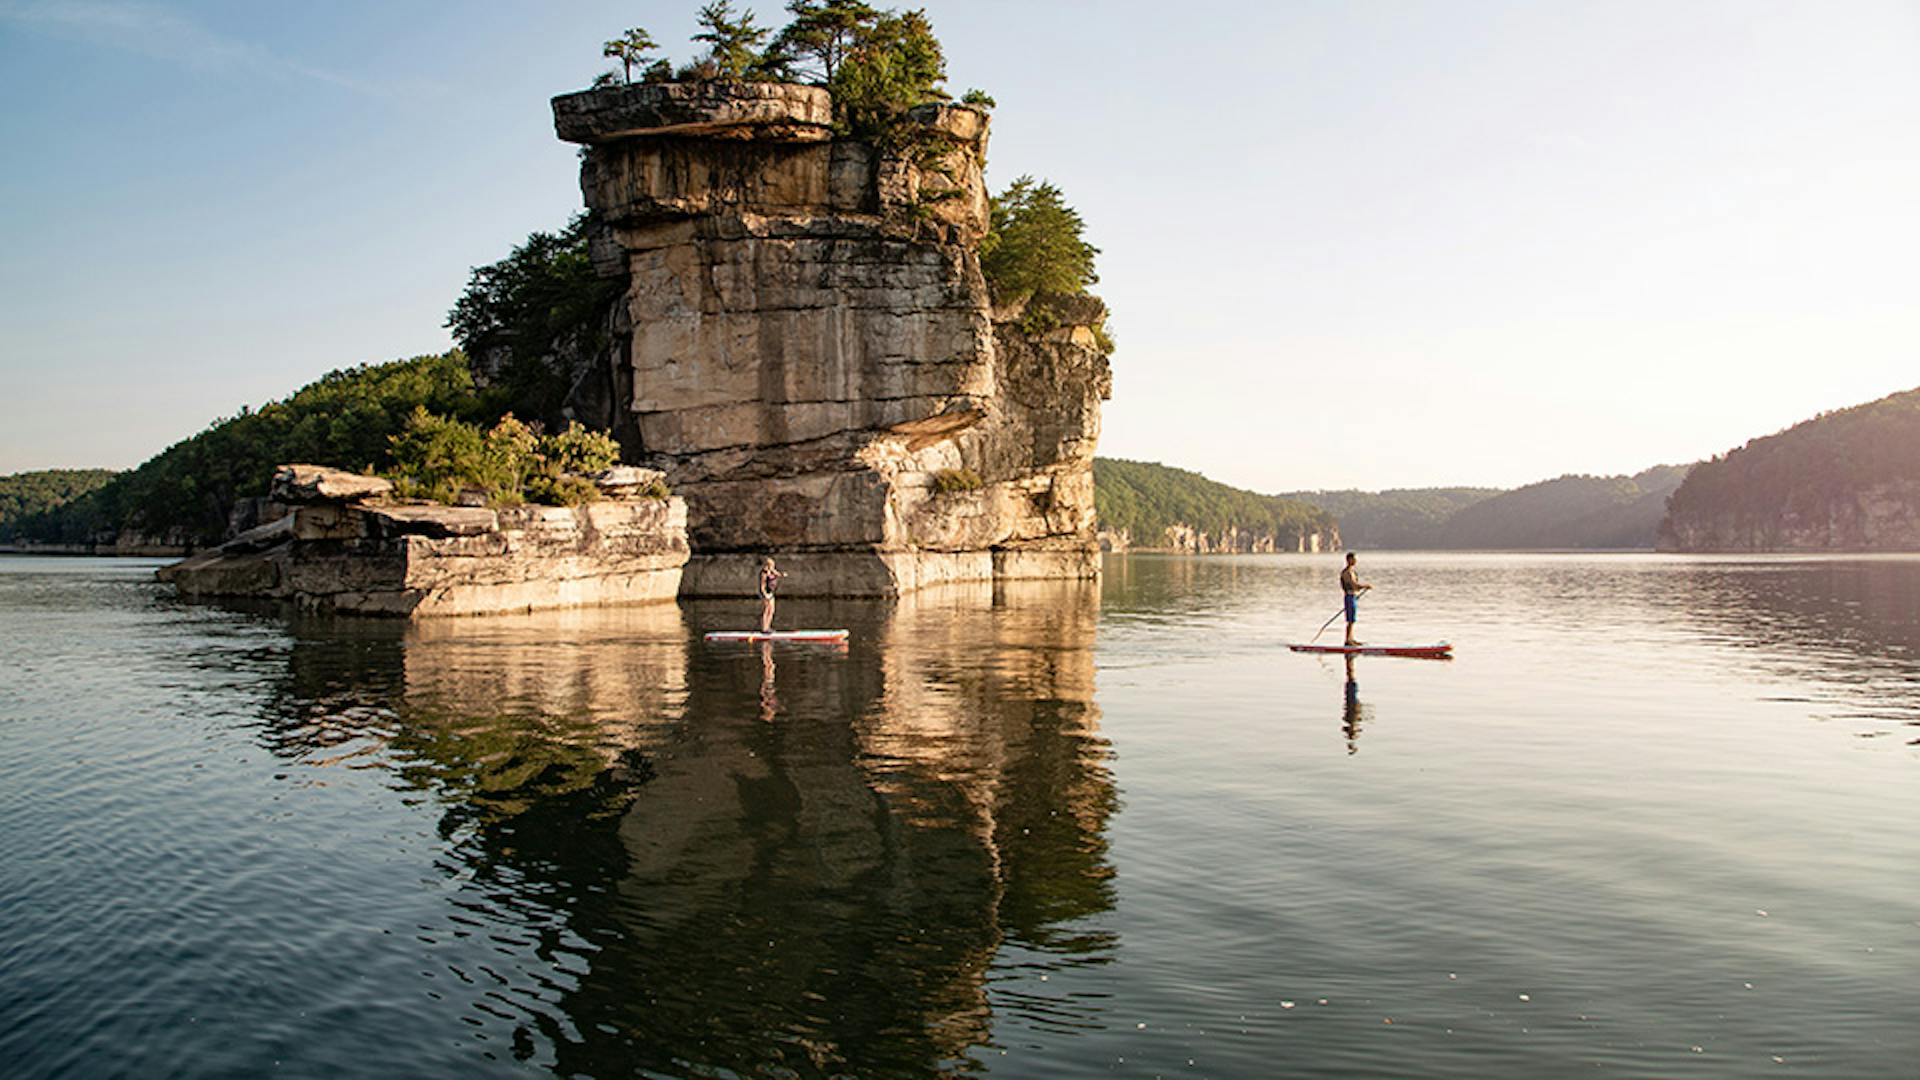 Stand-up paddleboarders on Summersville Lake in Summersville, West Virginia (photo courtesy of Visit Southern West Virginia)